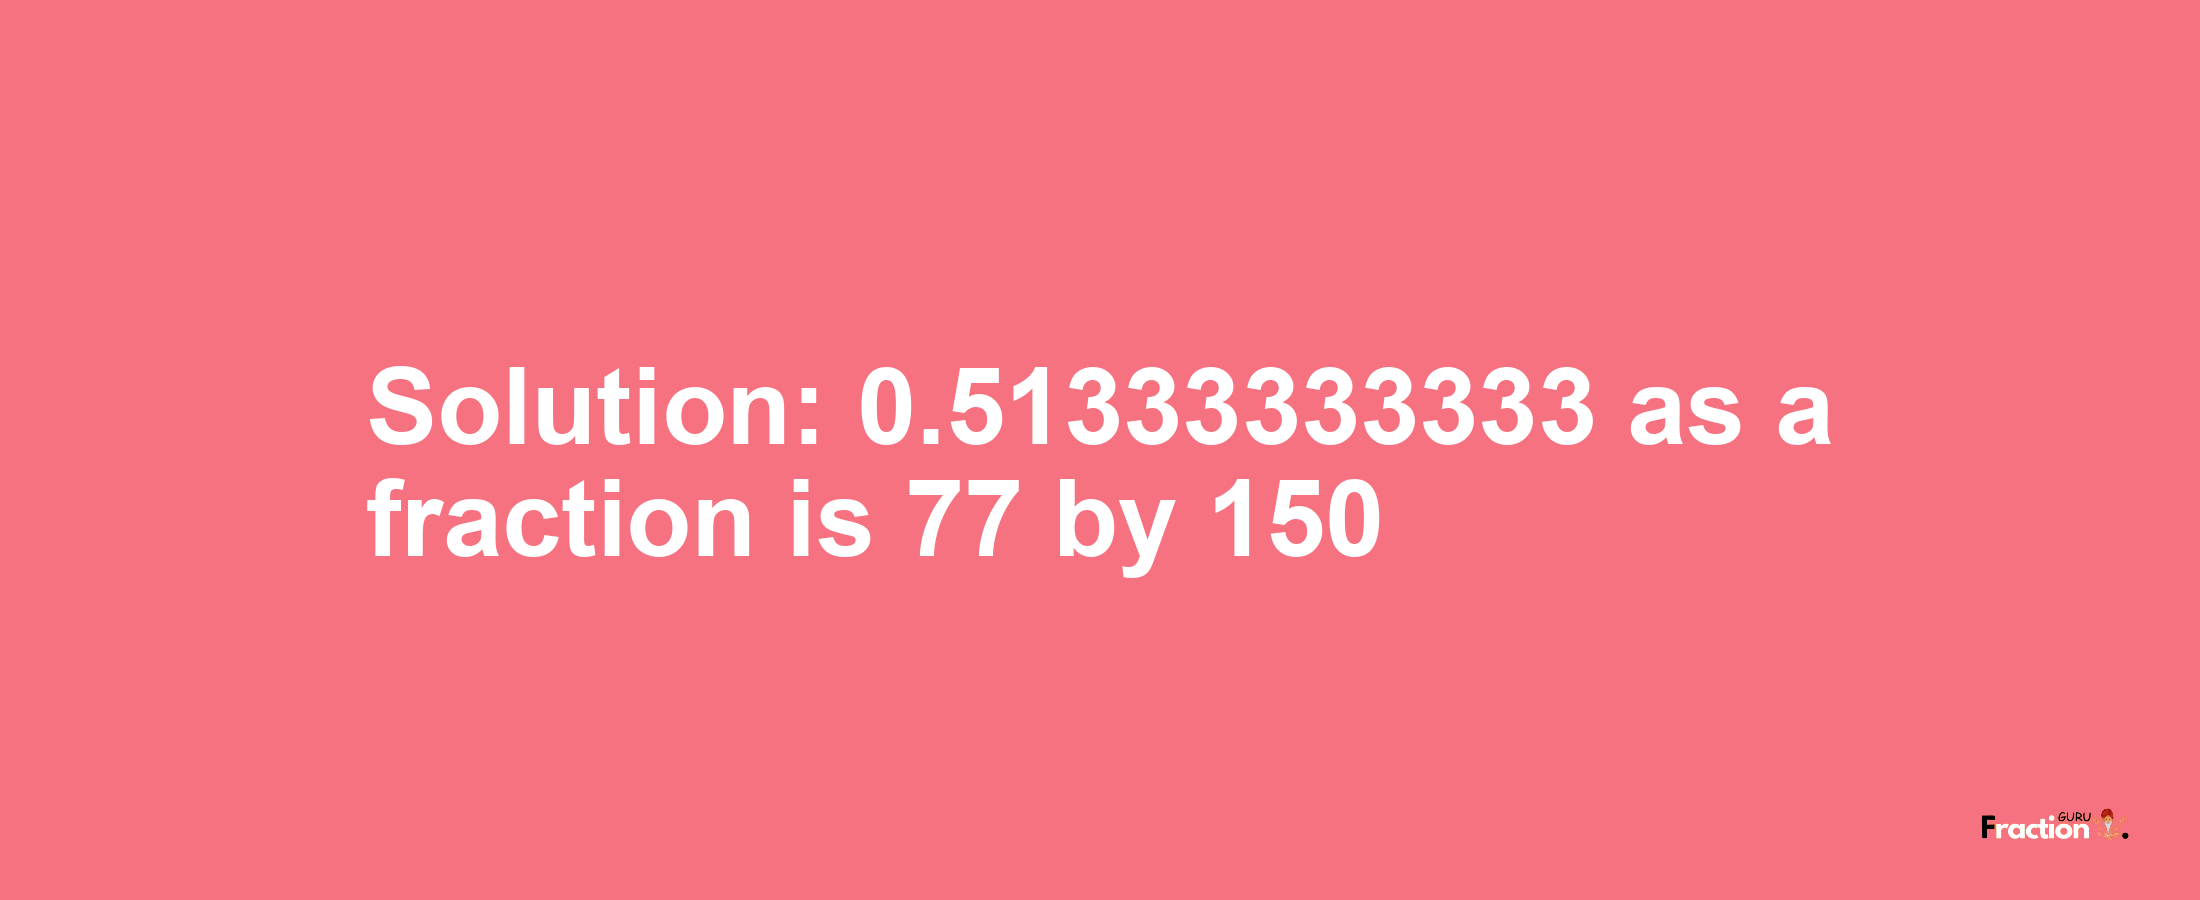 Solution:0.51333333333 as a fraction is 77/150